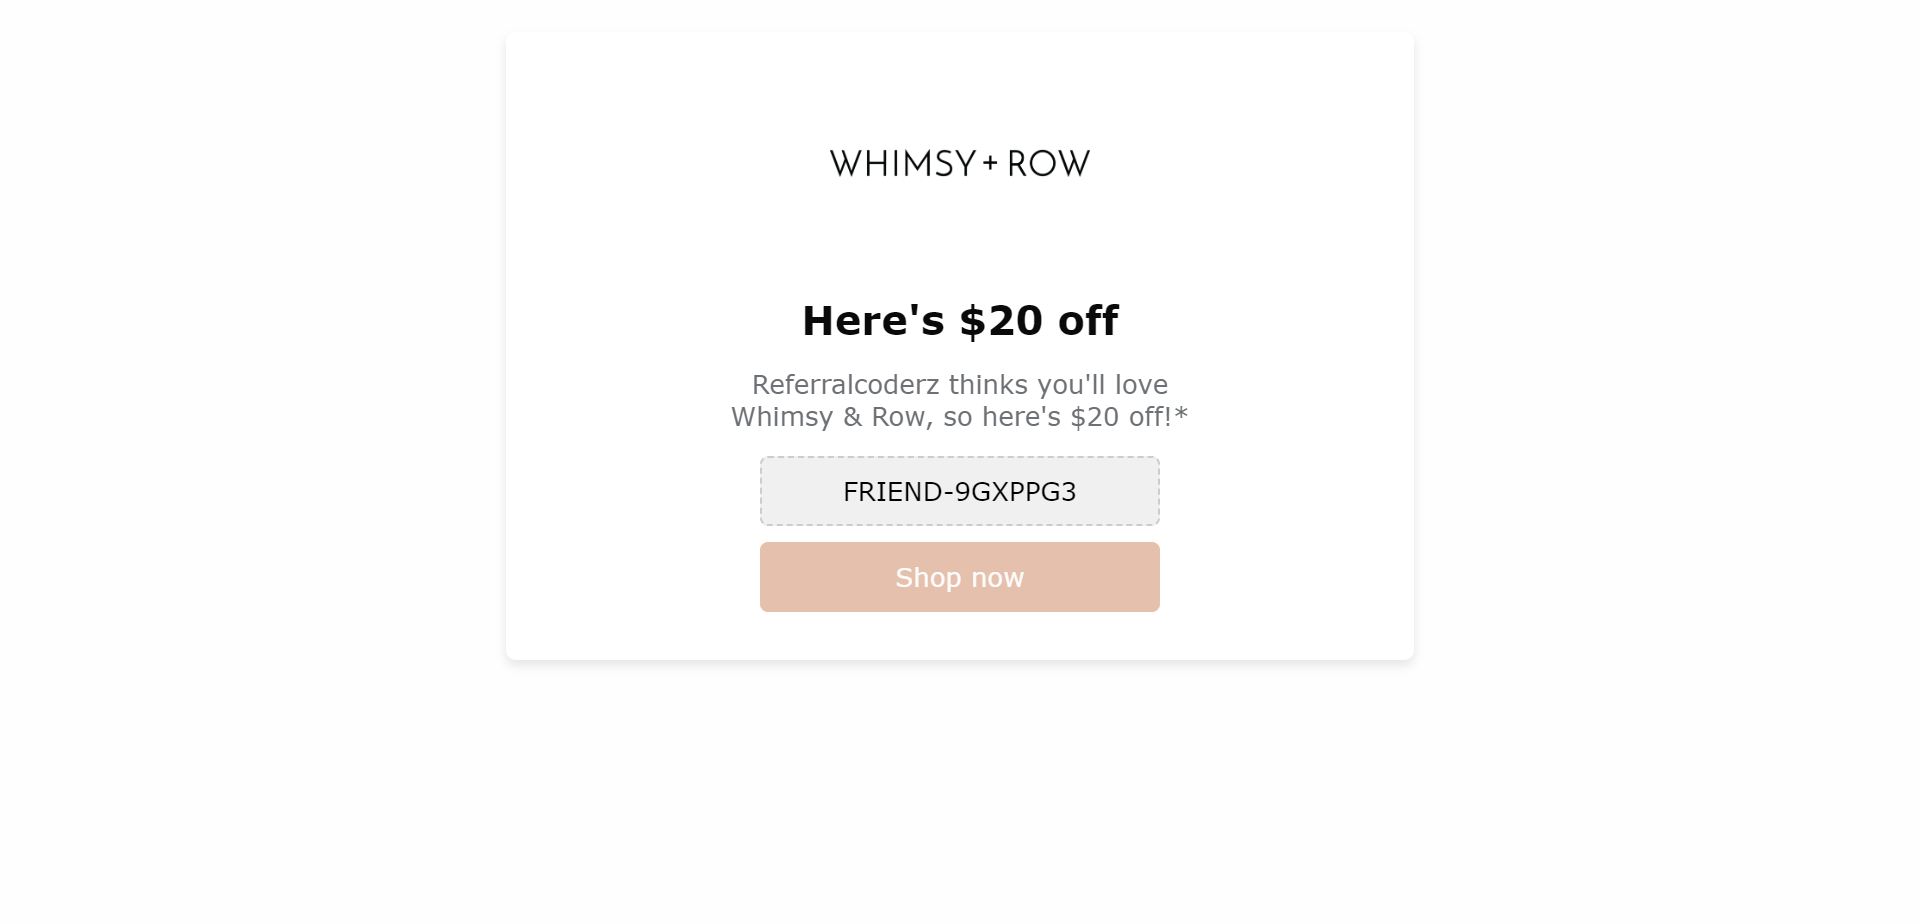 Landing Page for Whimy and Row